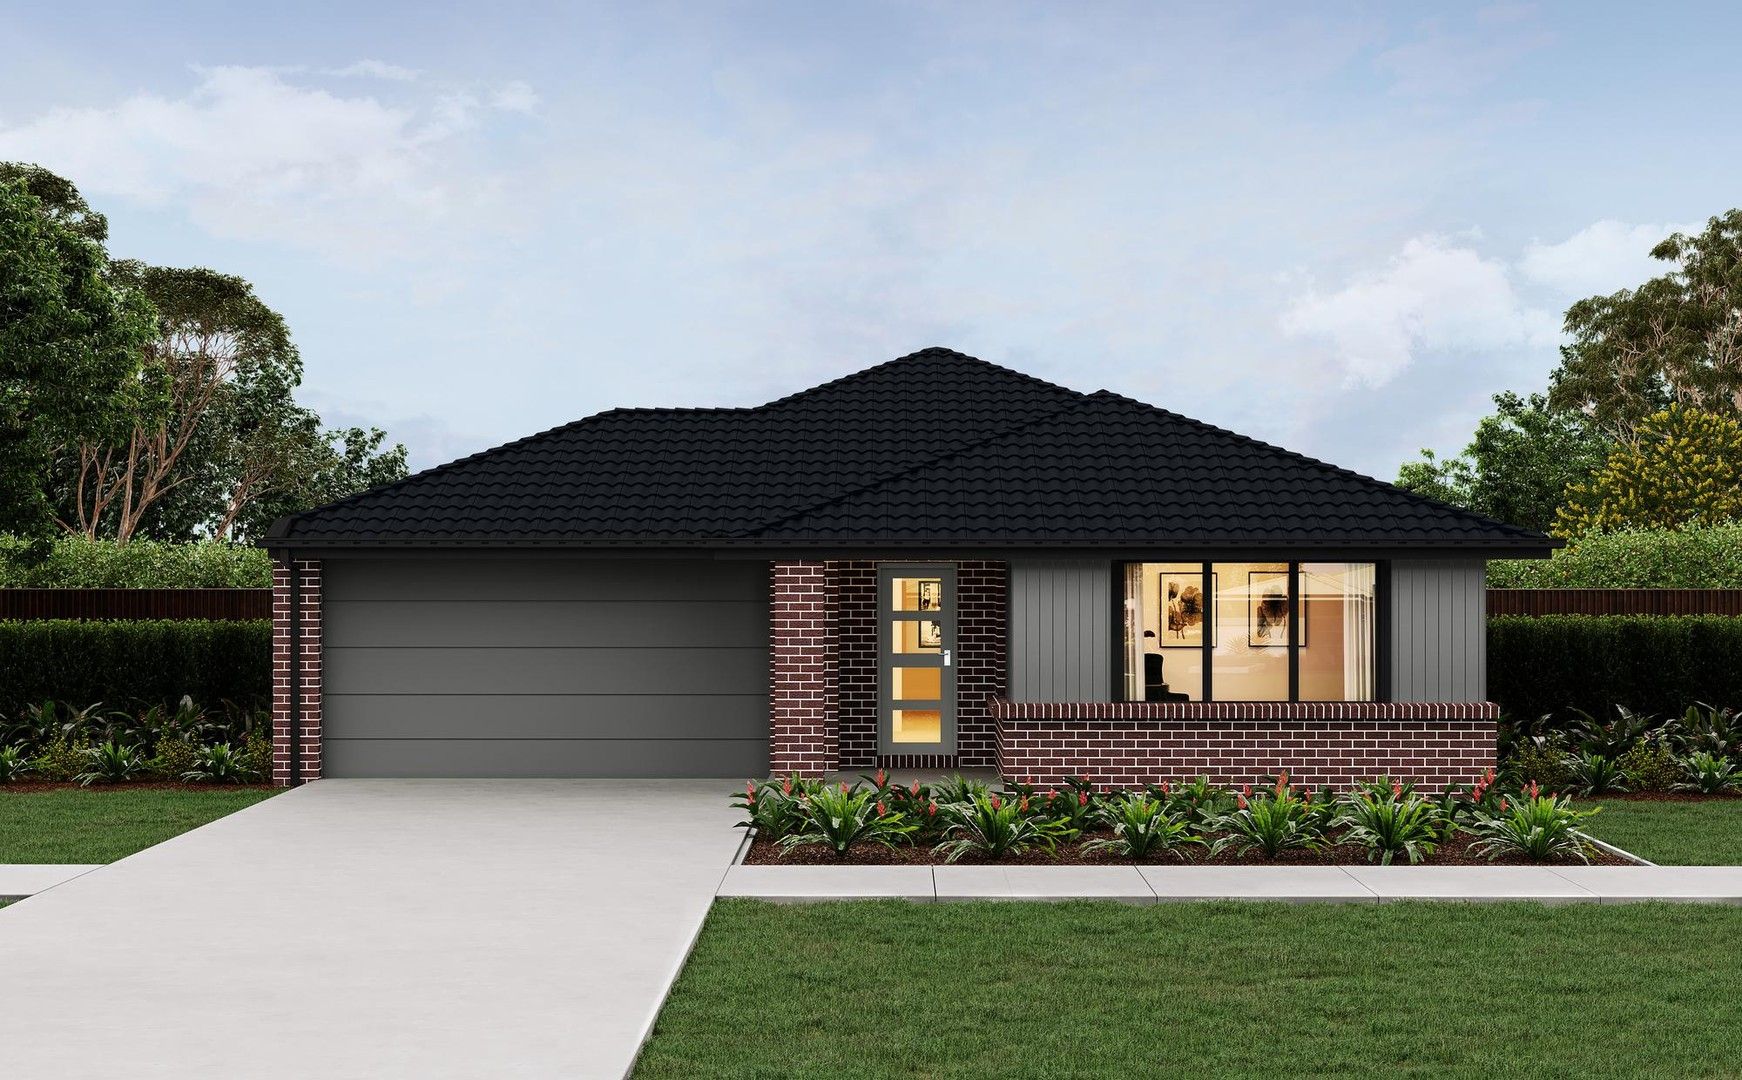 4 bedrooms New House & Land in 613 The Reserve Estate CHARLEMONT VIC, 3217